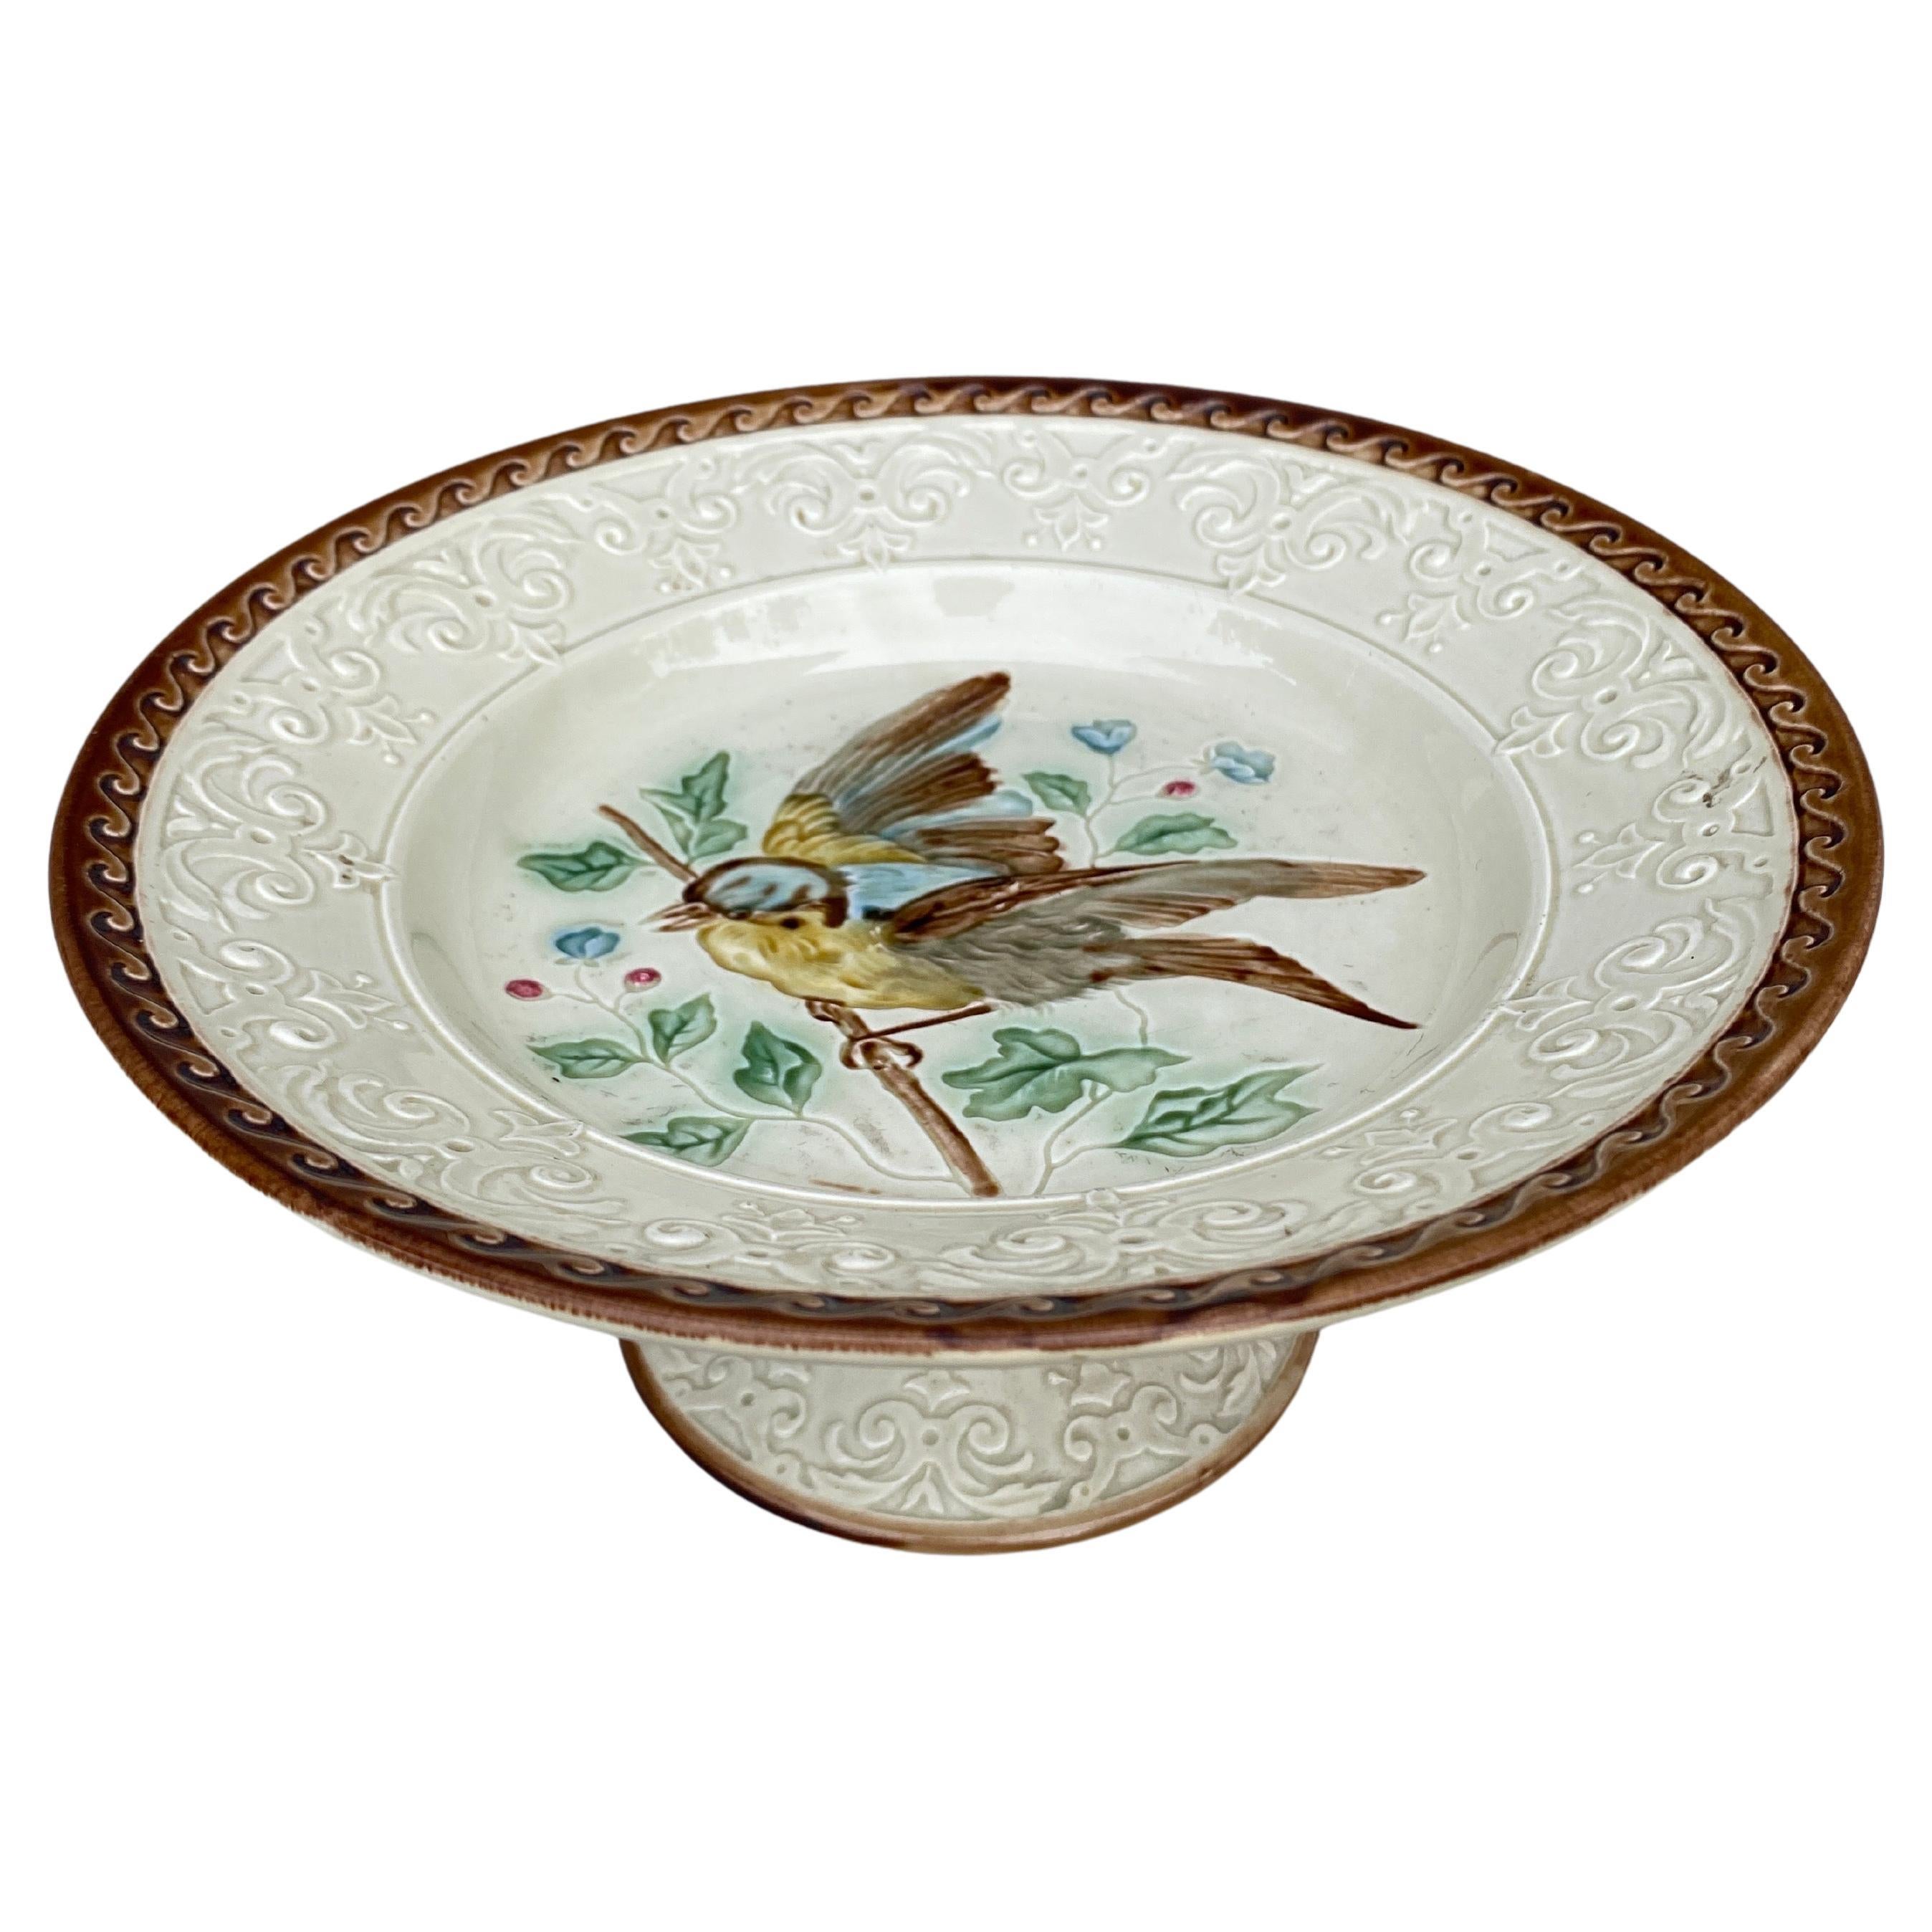 German Majolica Bird Cake Stand Circa 1890.
Bird with a branch and flowers.